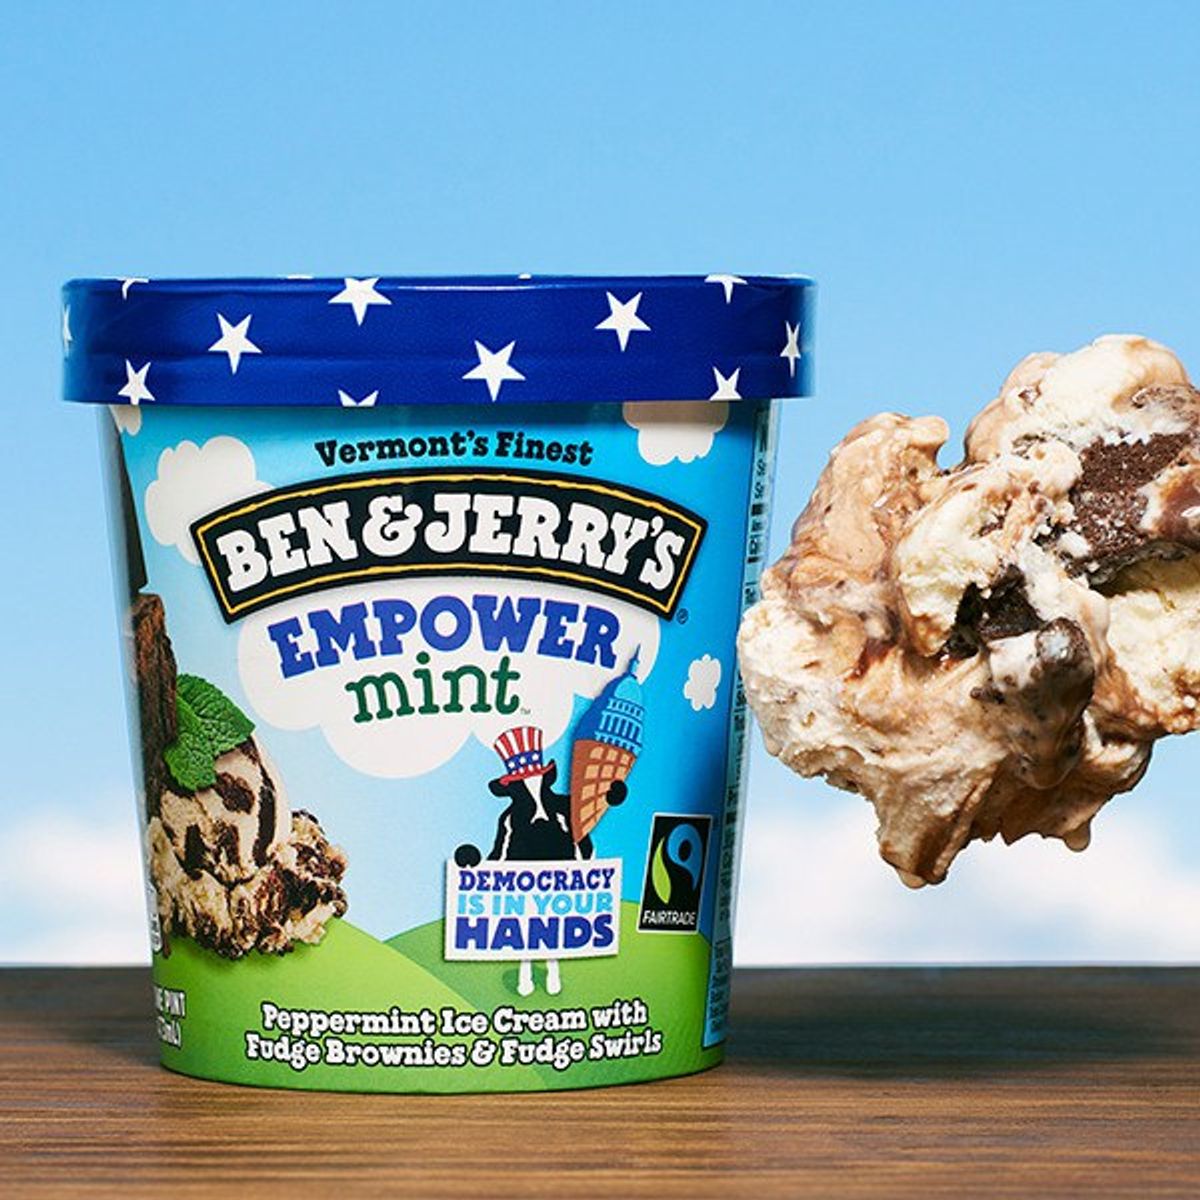 Ben & Jerry's: Black Lives Matter Because Injustice Steals From Us All